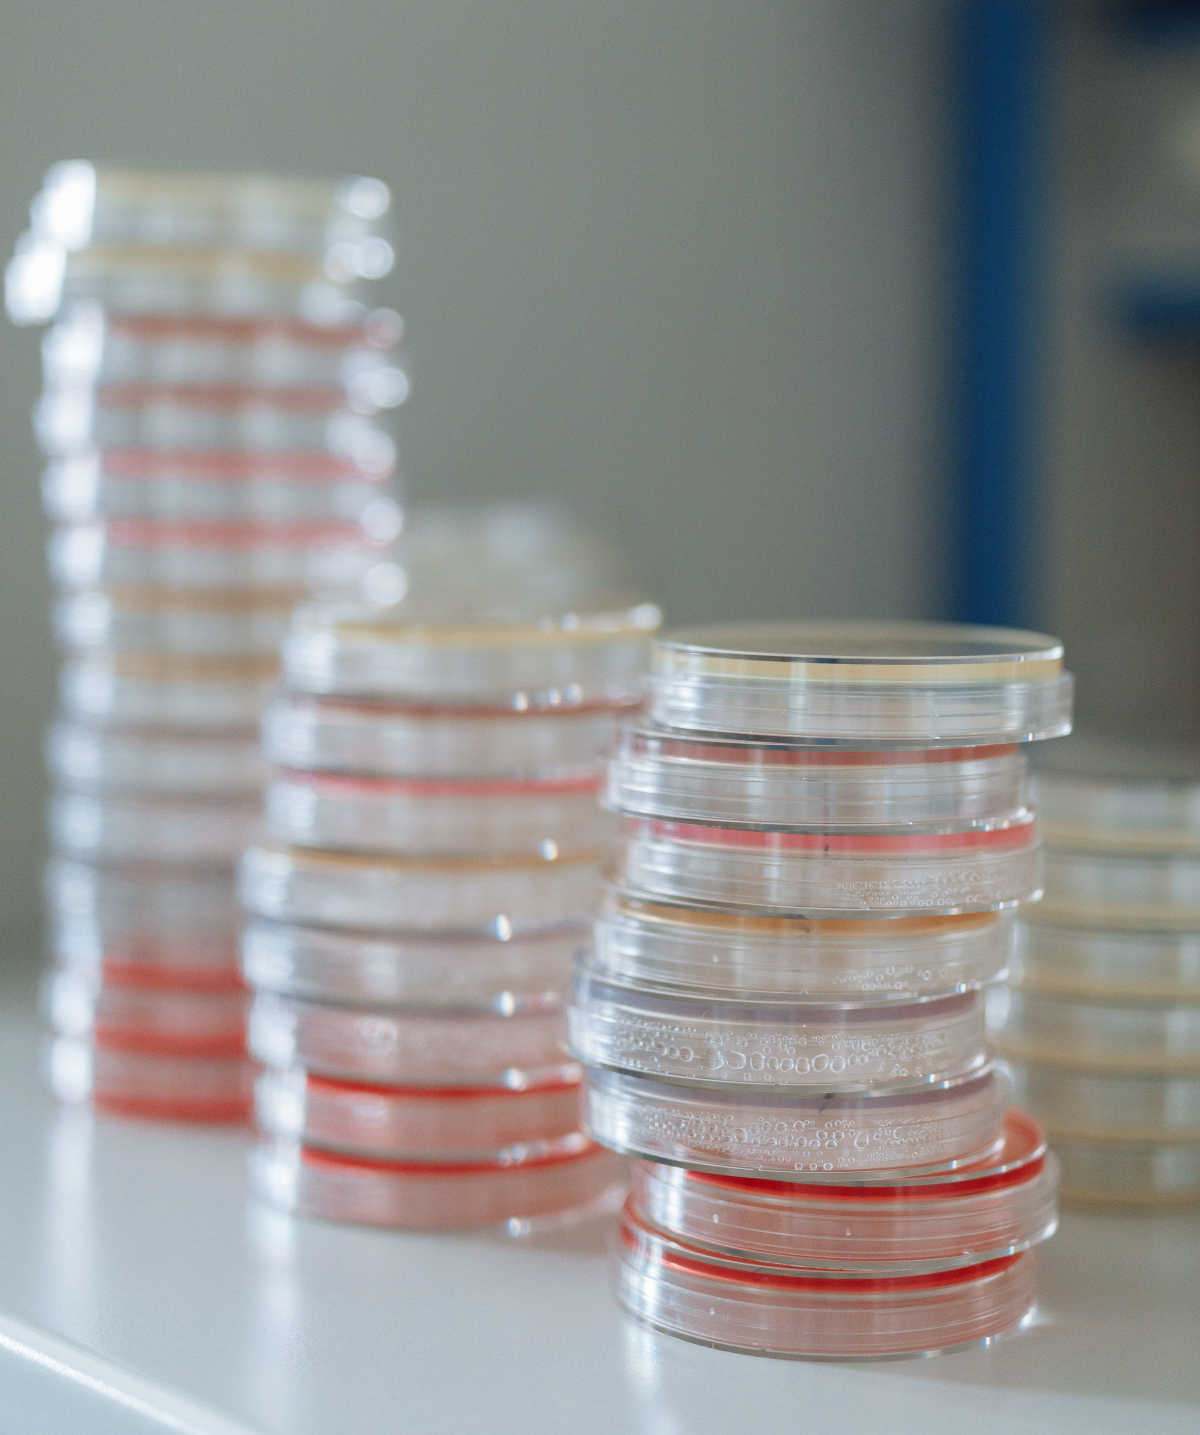 A stack of petri dishes with
					growth medium for bacteria